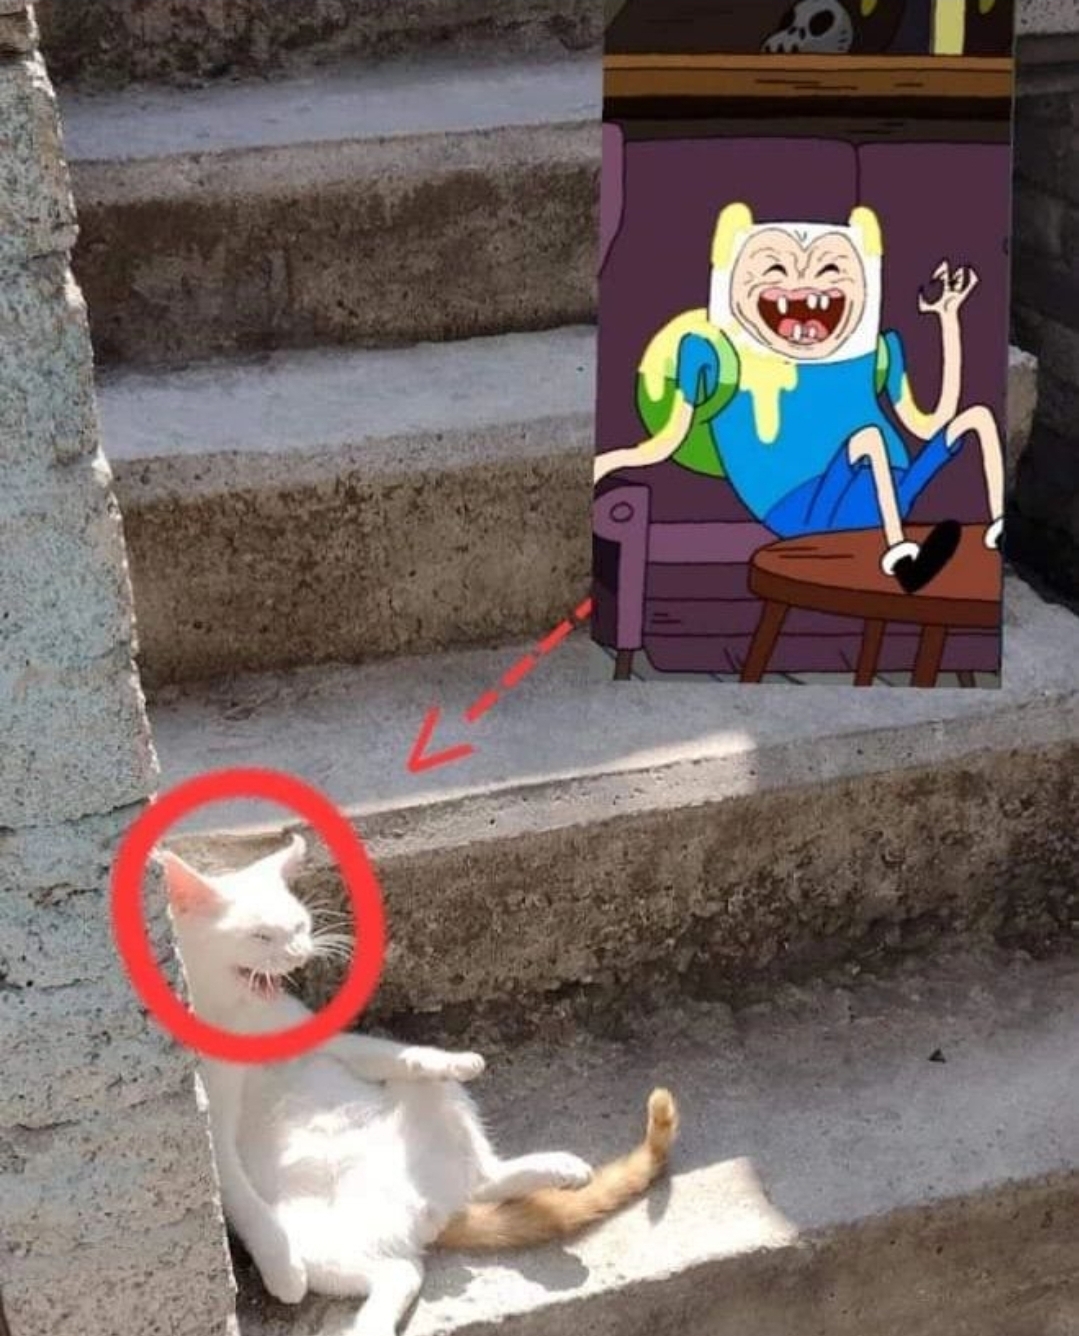 a cat that is making an expression similar to a screenshot of finn the human from adventure time